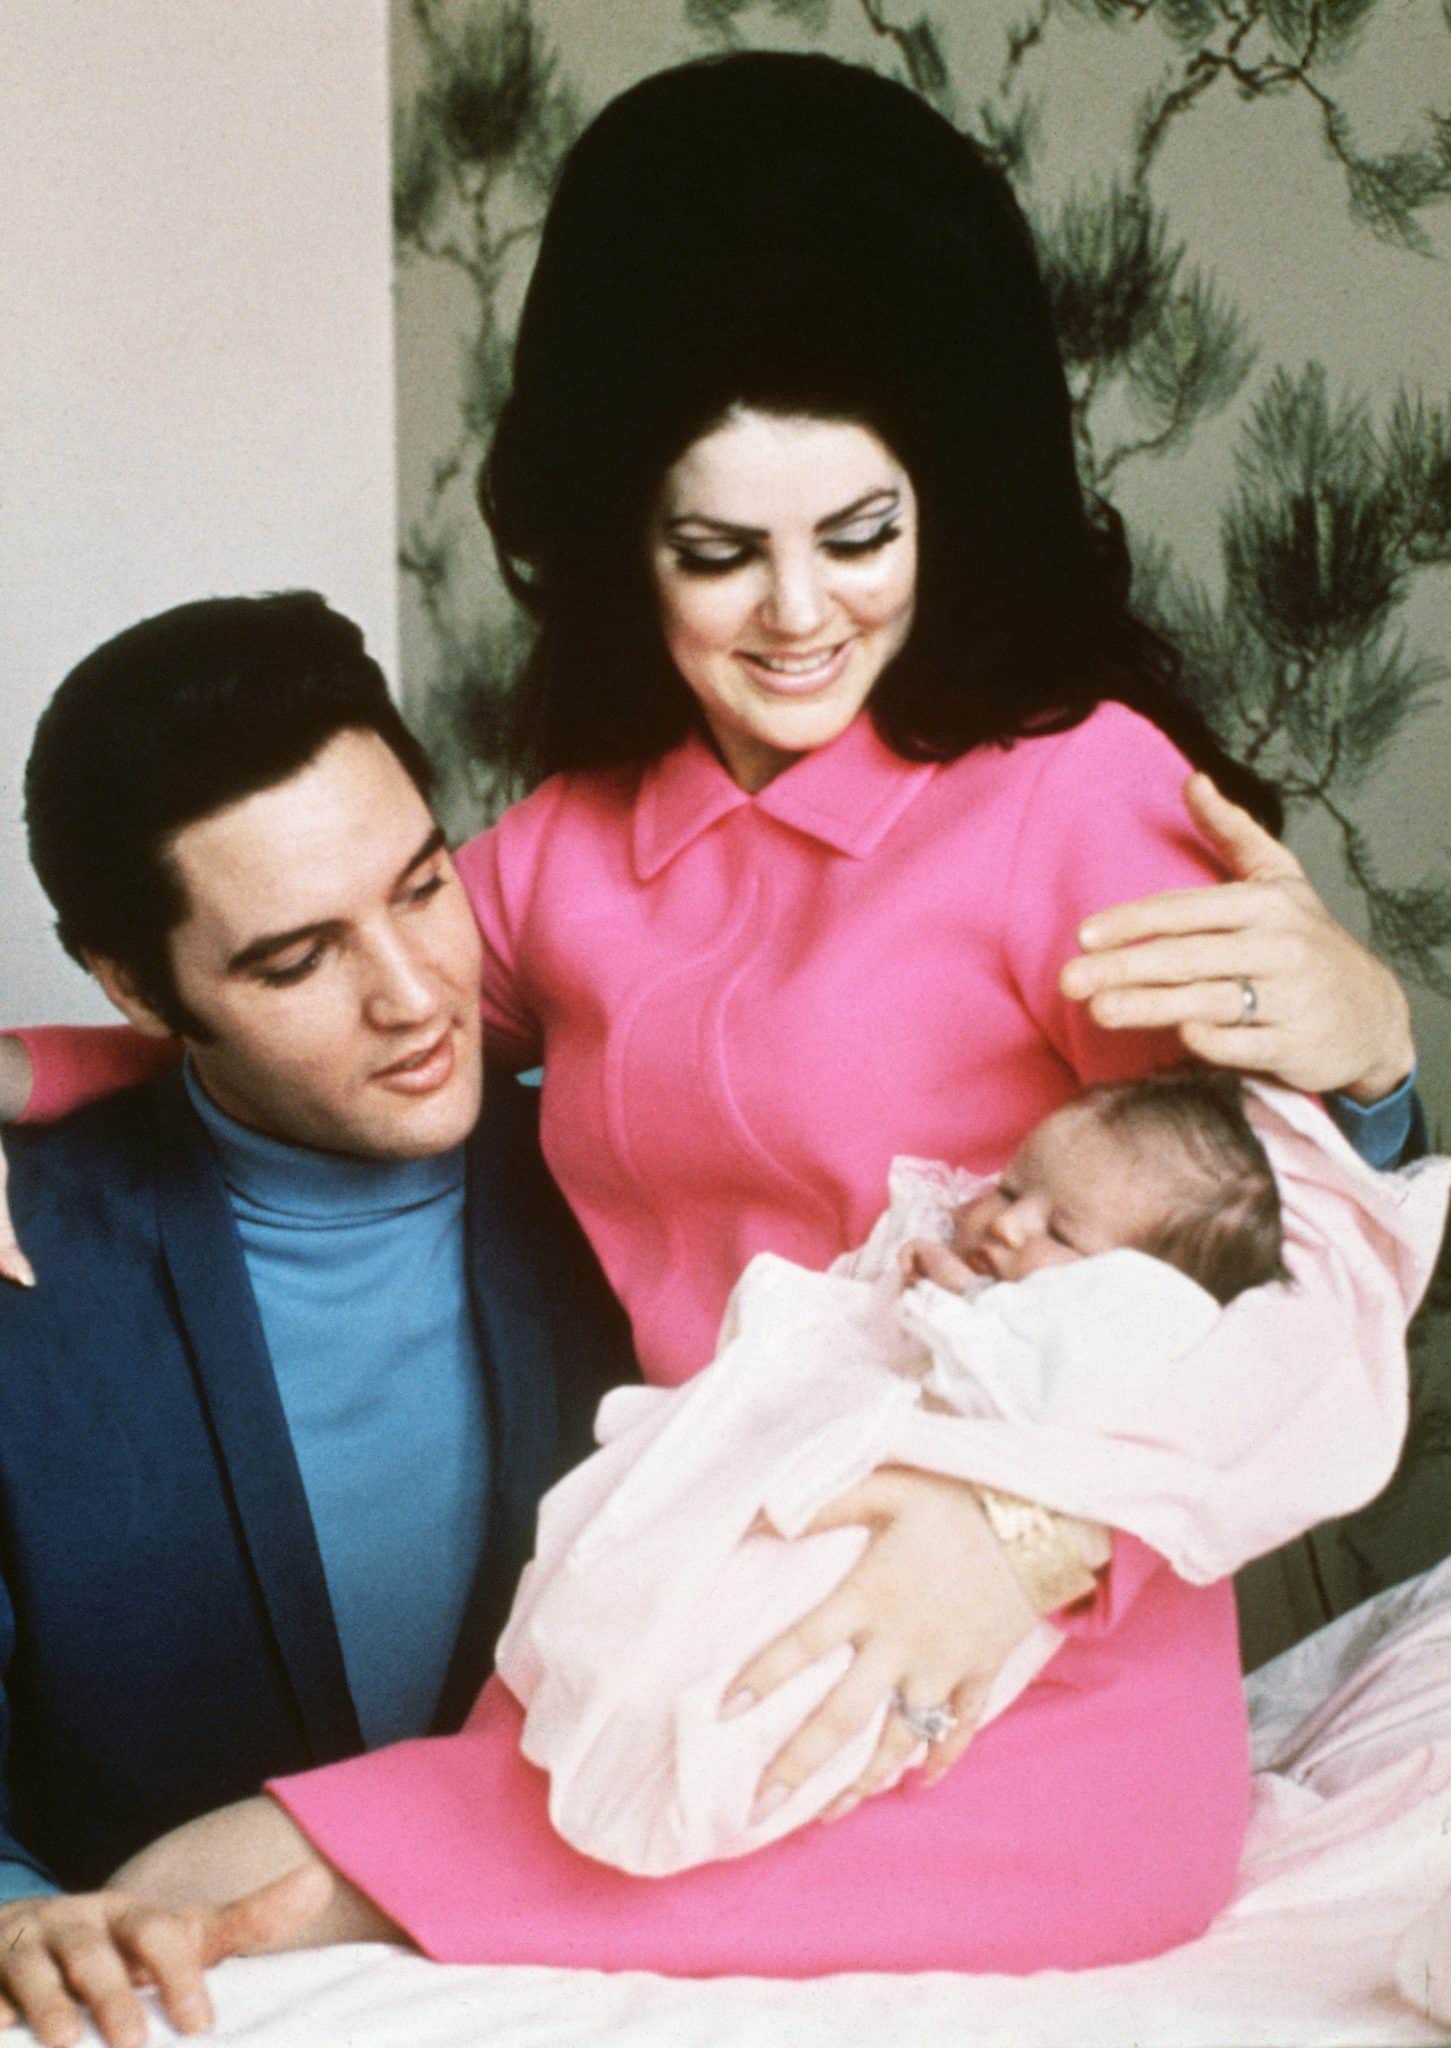 Elvis Presley and his wife, Priscilla, prepare to leave the hospital with their new daughter, Lisa Marie Presley. Memphis, Tennessee, February 5, 1968.